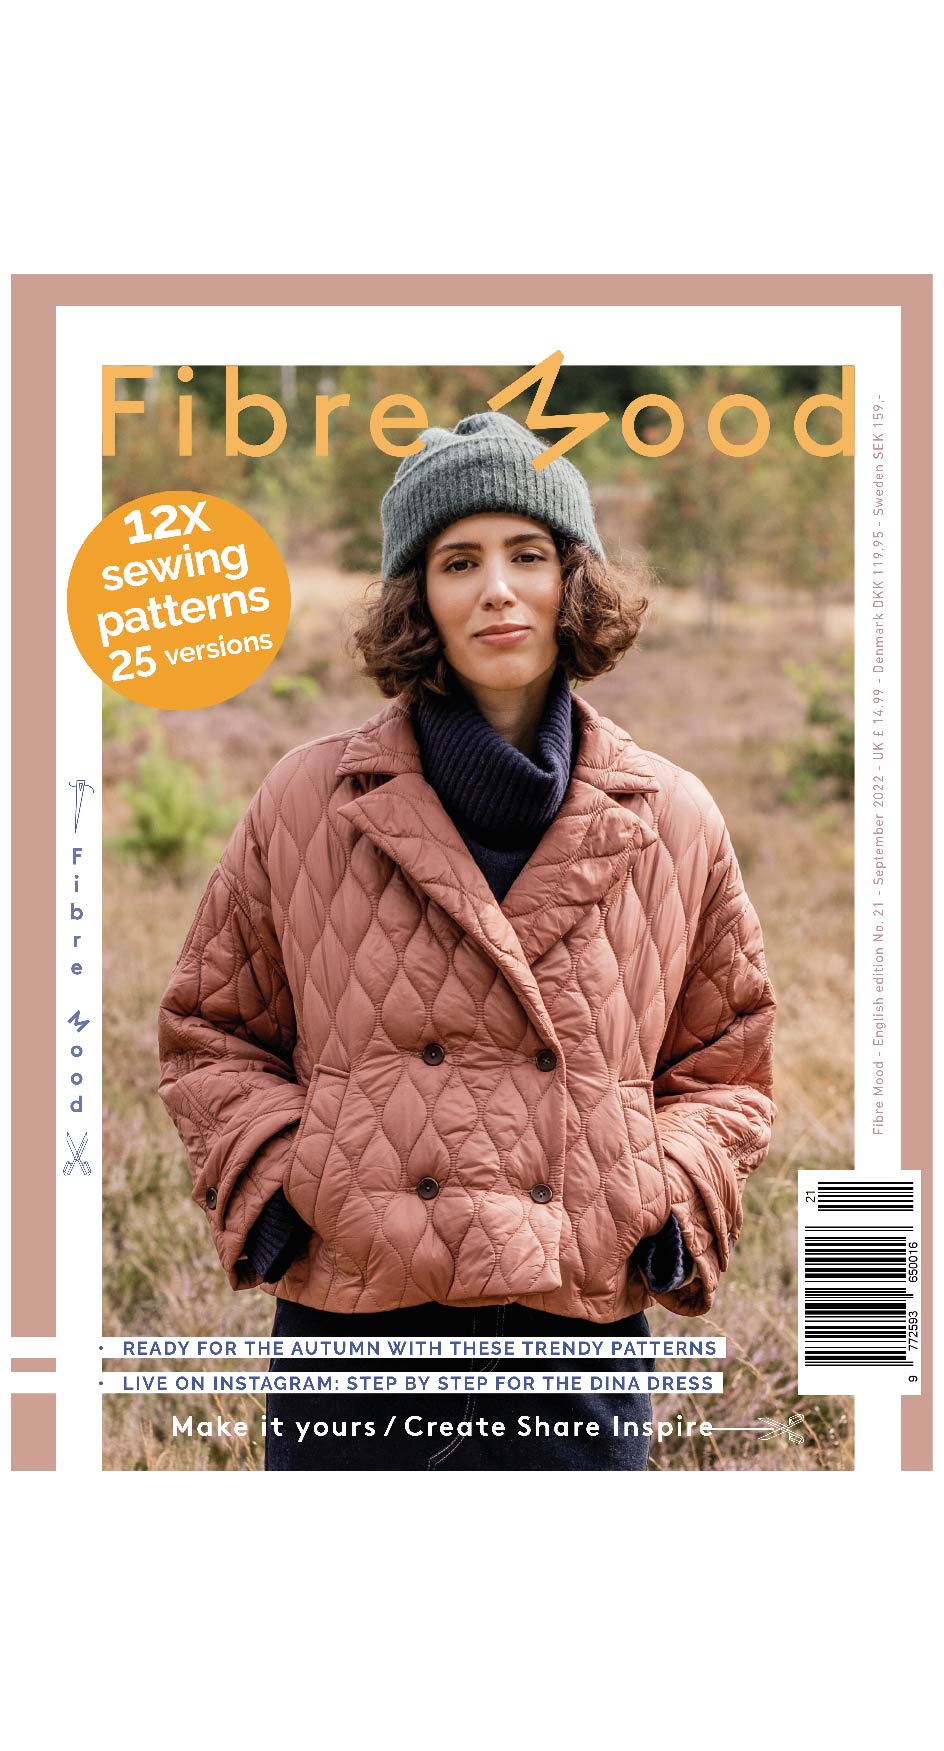 Fibre Mood is a popular sewing pattern magazine and the perfect gift or Christmas present. Each magazine includes 12 patterns and many style variations, you will receive editions 21 and 22 (the two latest issues), which are full of autumn and winter sewing inspiration.